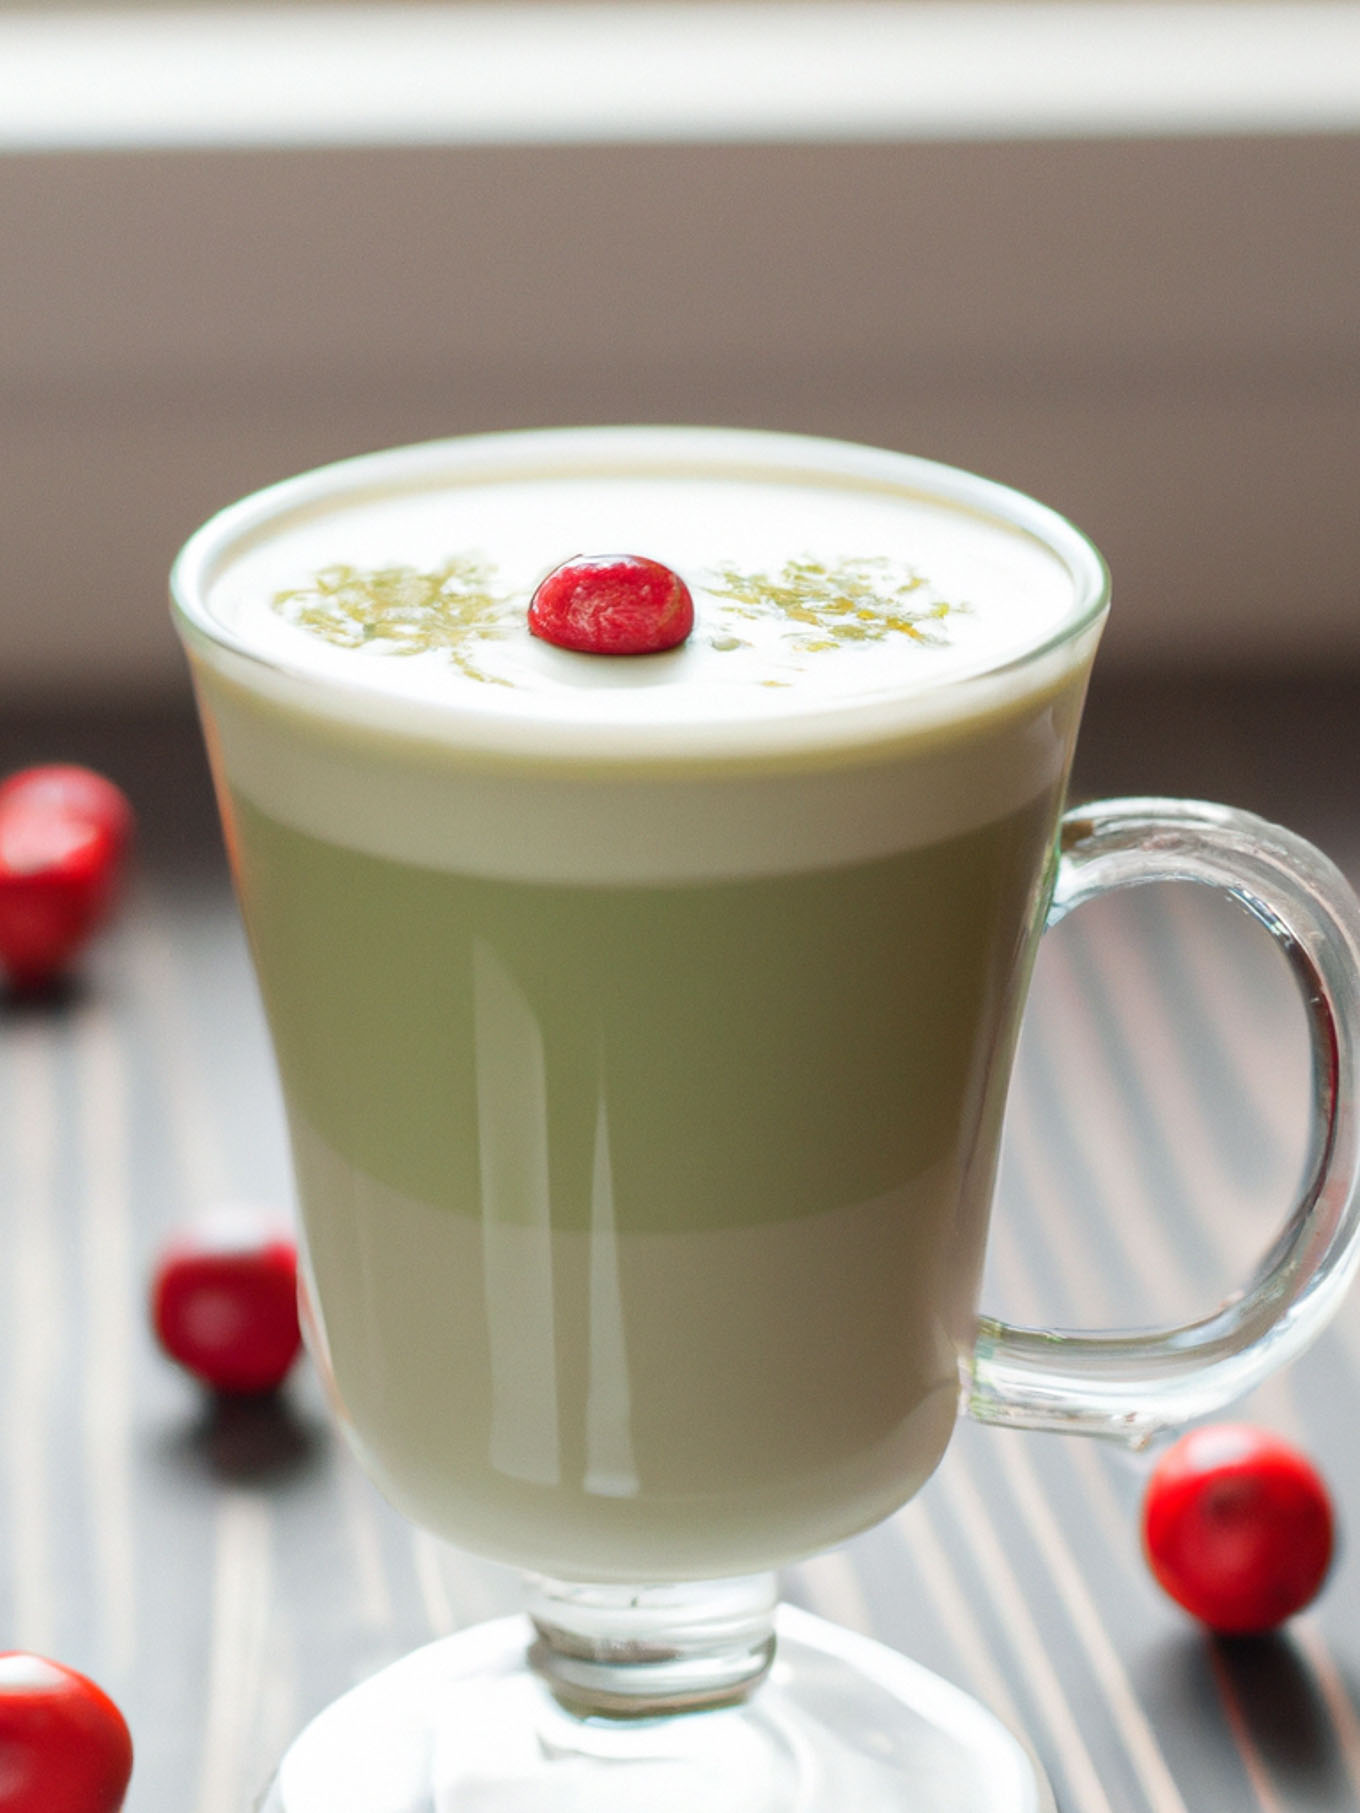 a hot matcha latte in a glass with a cranberry garnish